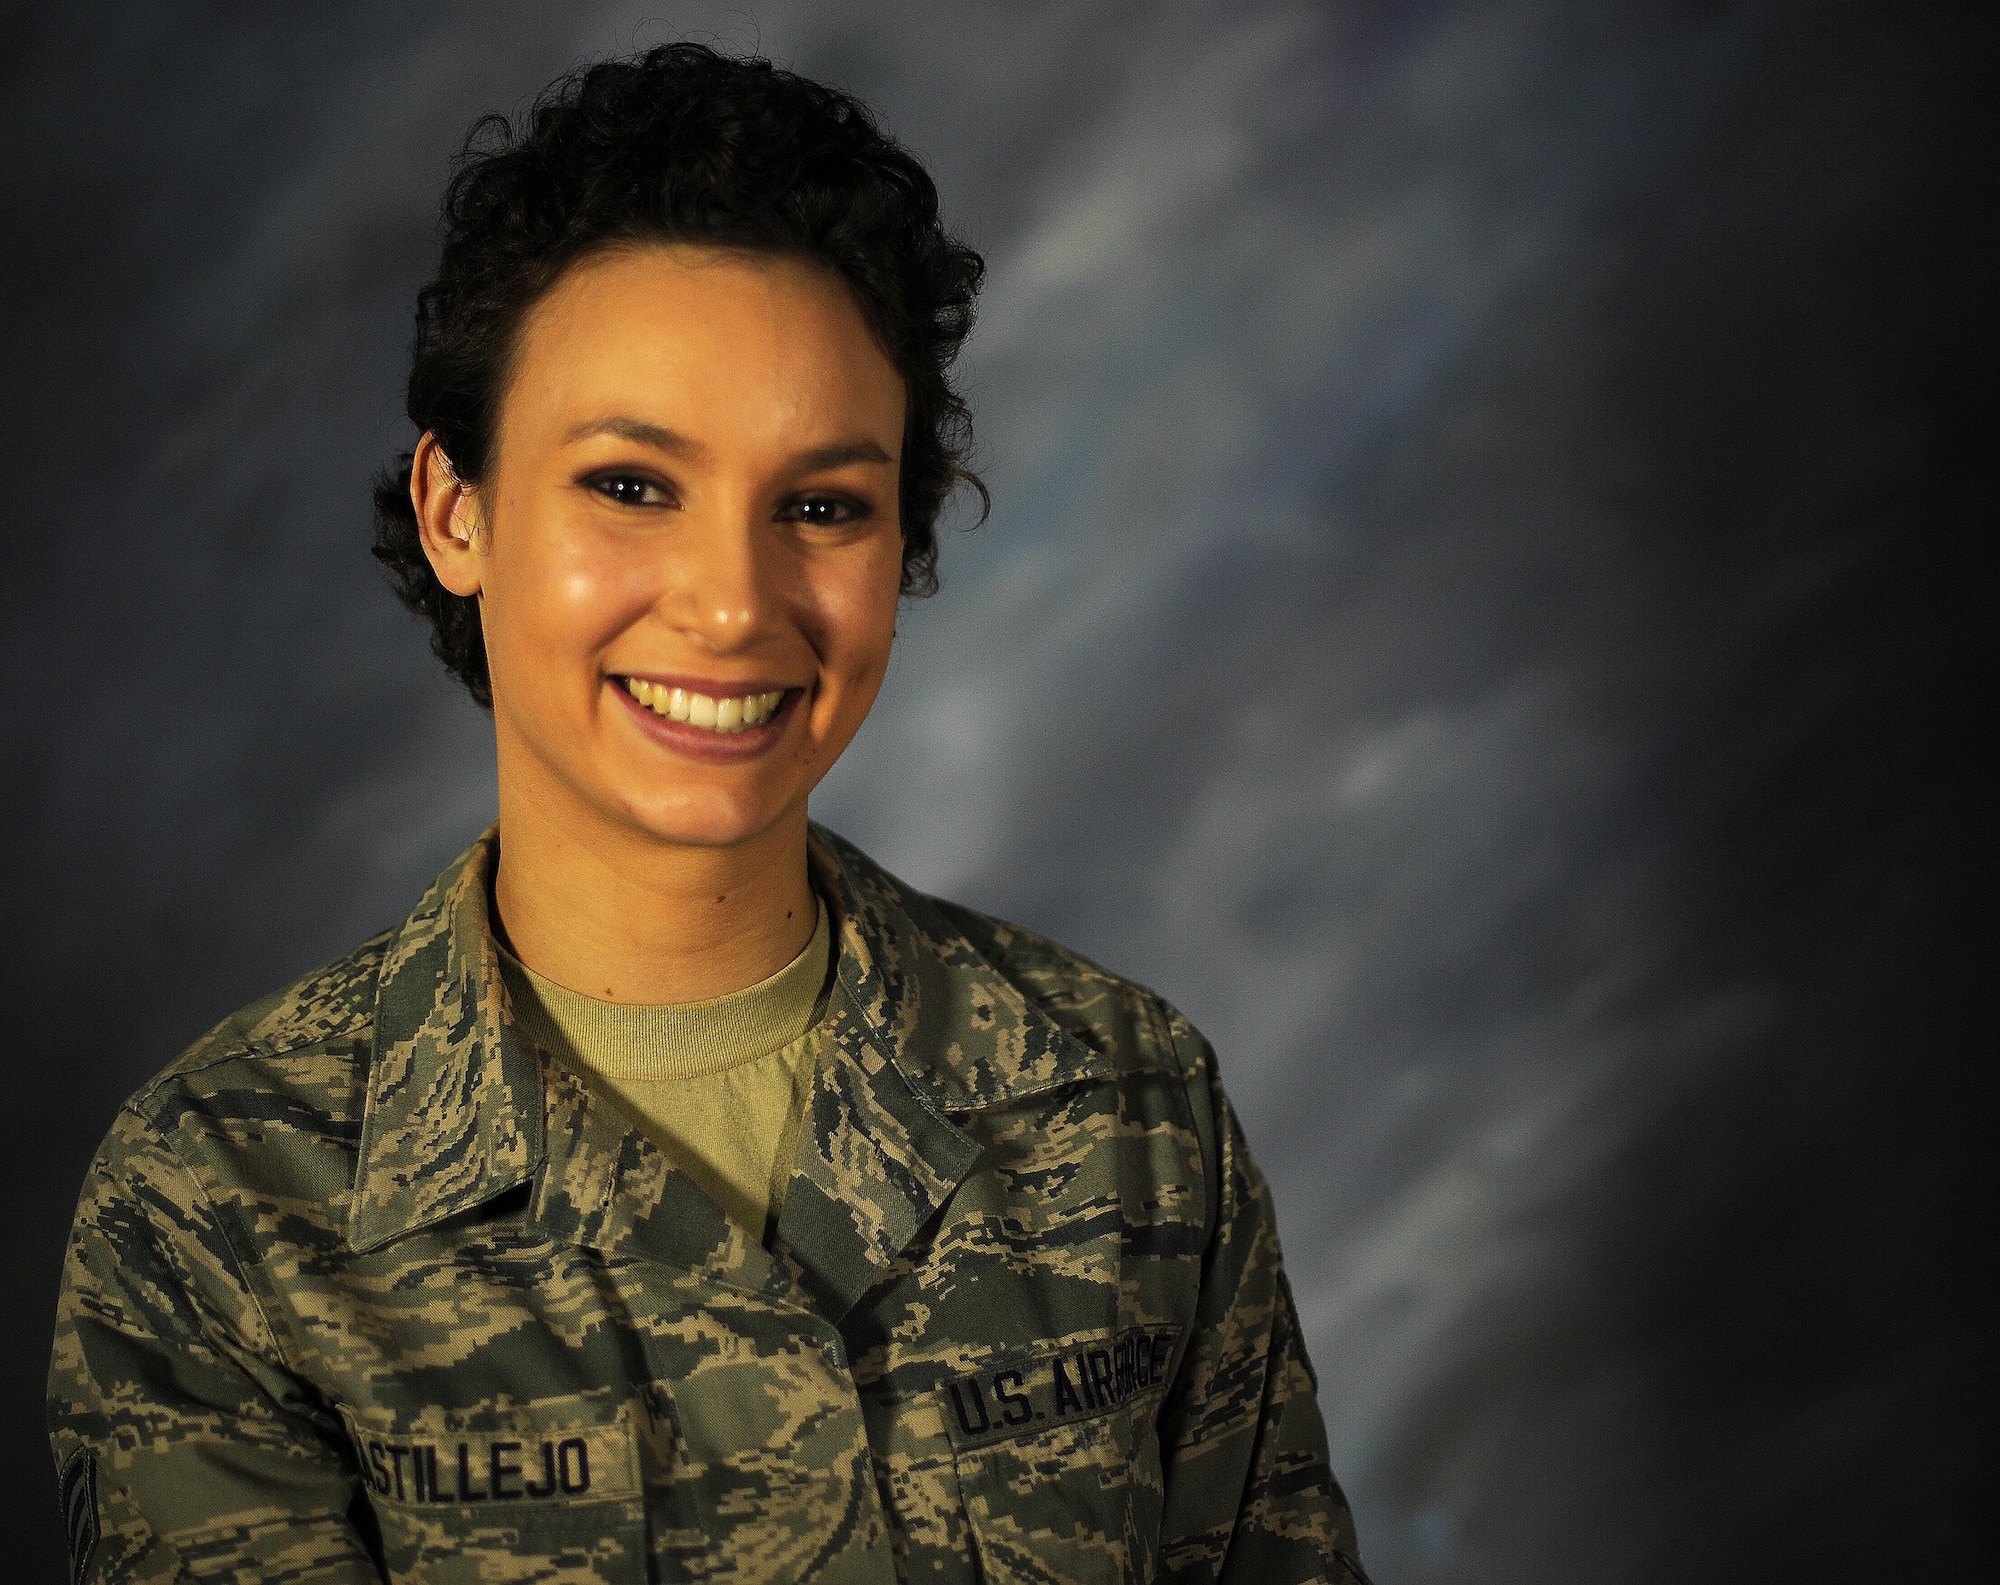 Senior Airman Myiah Castillejo, assigned to the 348th Reconnaissance Squadron, was diagnosed with stage three Hodgkin lymphoma in January 2014. After spending months in chemotherapy and radiation treatment, she was declared cancer free in January 2015. She now spends her time training for her job and lifting weights at the gym. (U.S. Air Force photo/Airman 1st Class Bonnie Grantham)